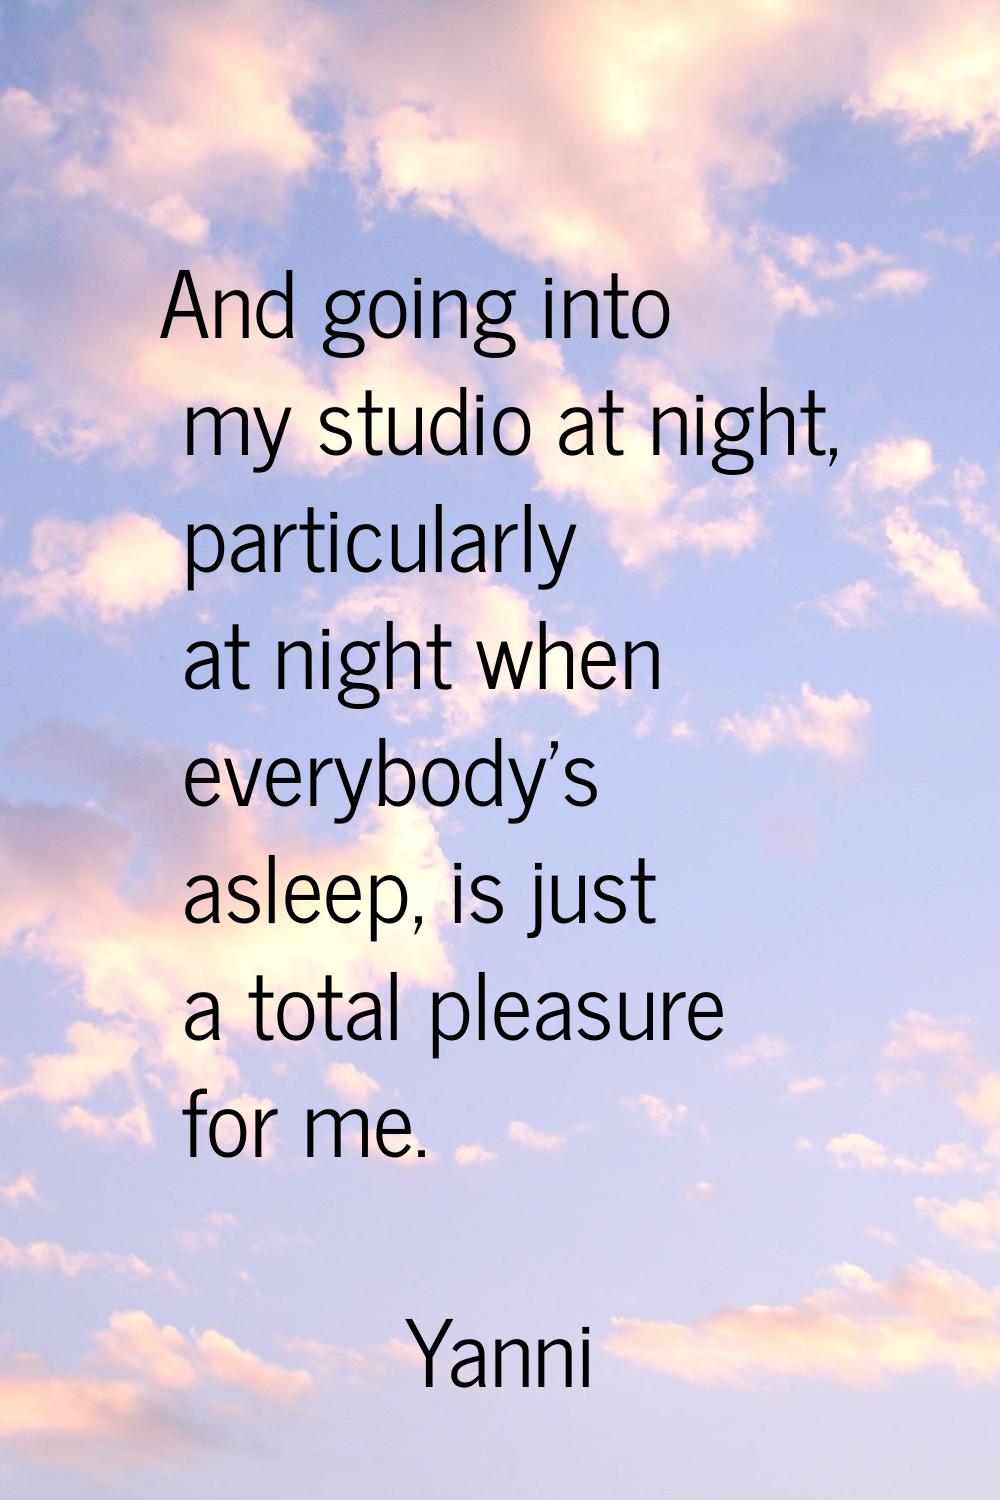 And going into my studio at night, particularly at night when everybody's asleep, is just a total p